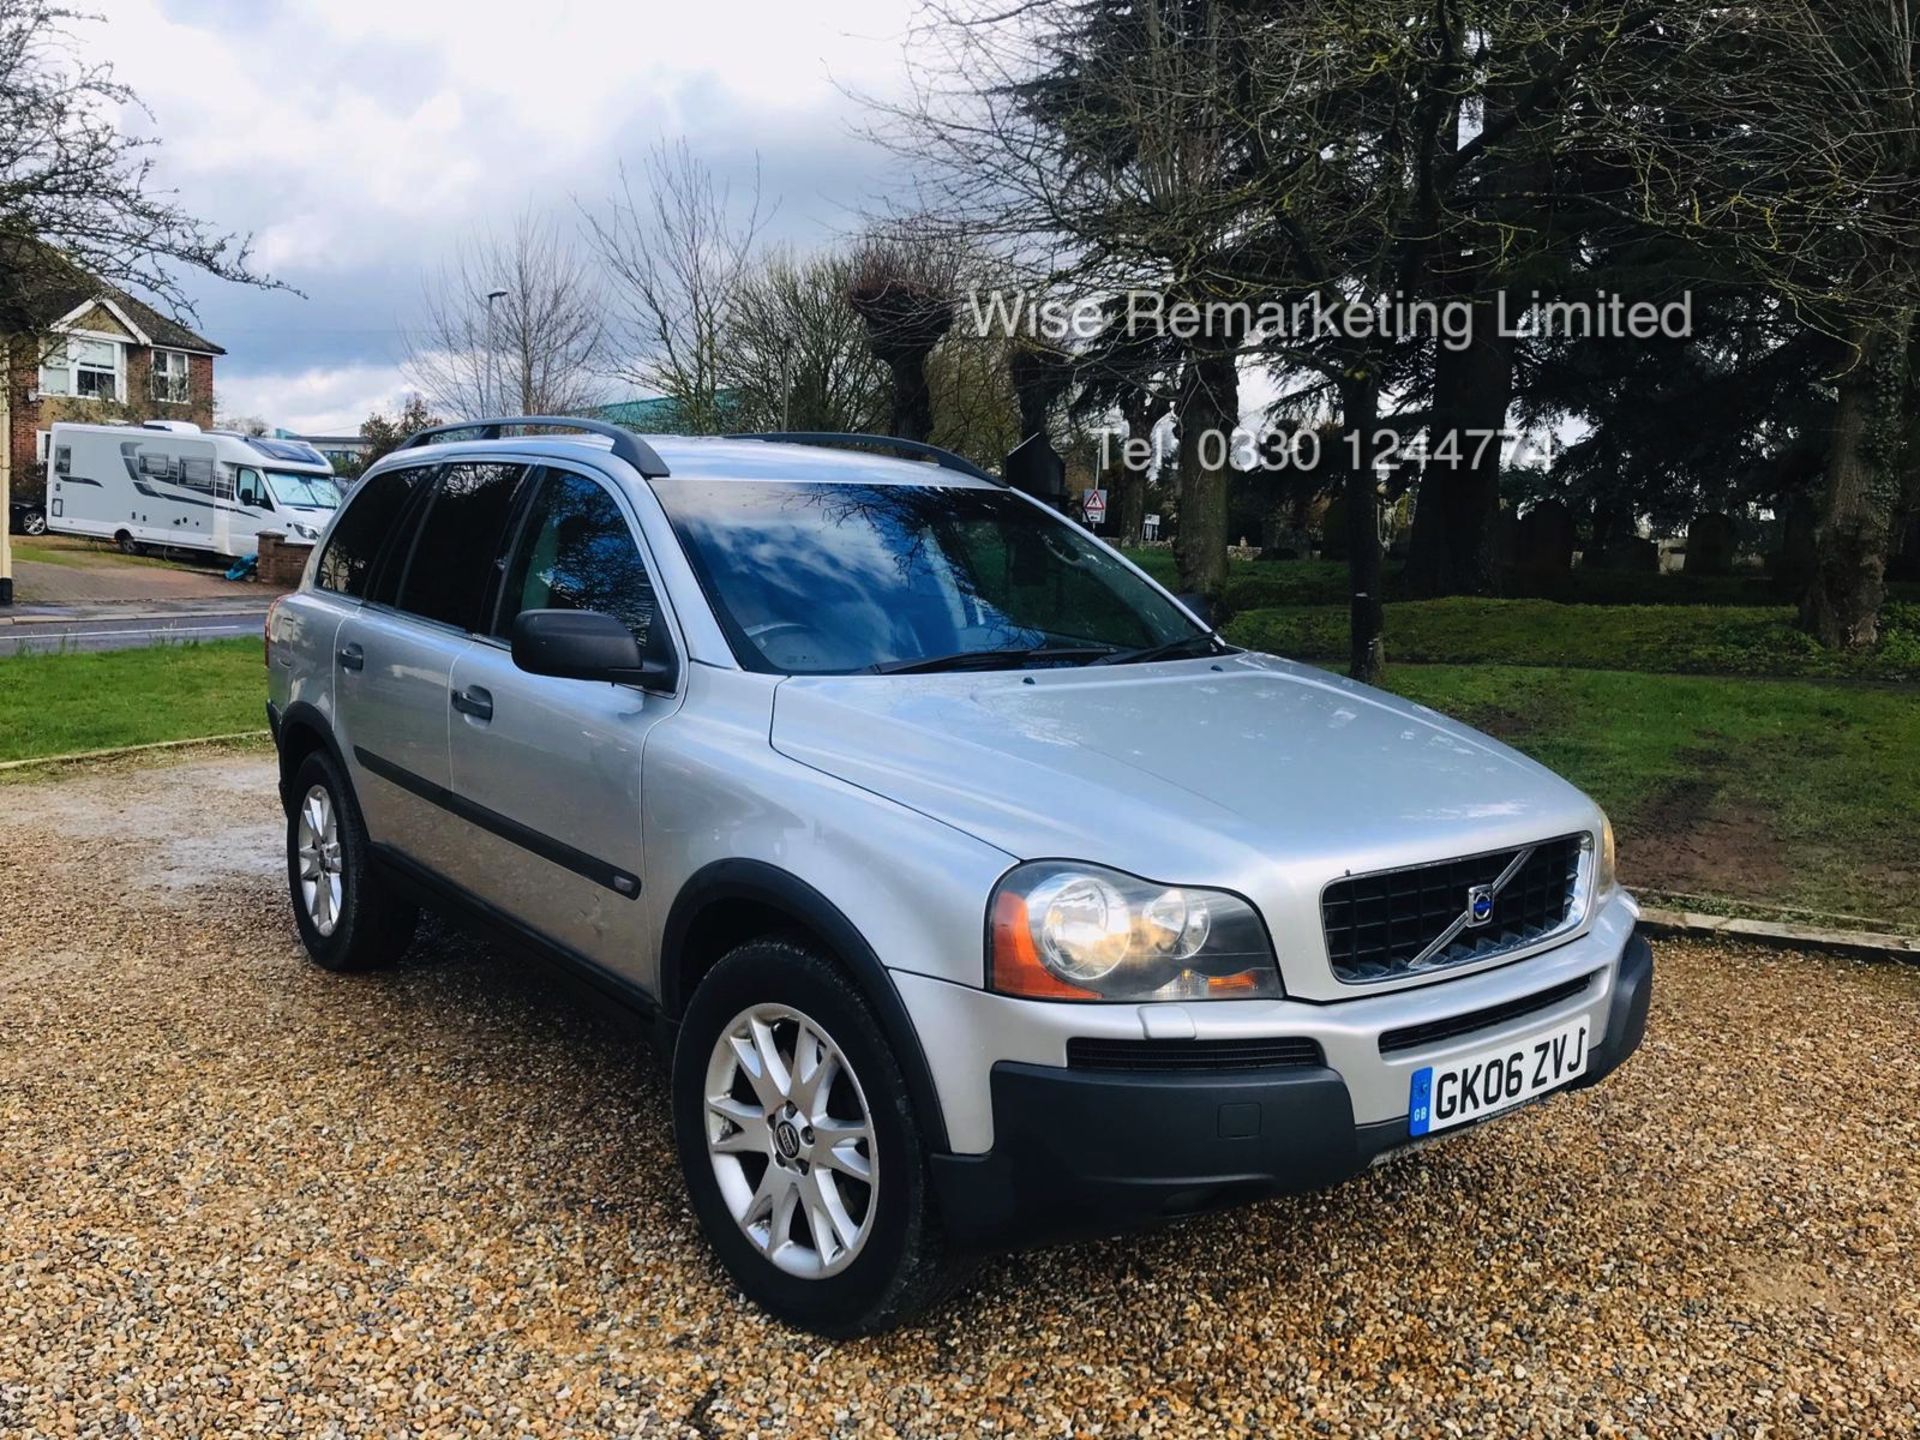 Volvo XC90 2.4 D5 Special Equipment Geartronic - 2006 06 Reg - Service History - 7 Seats - Sat Nav - Image 4 of 27